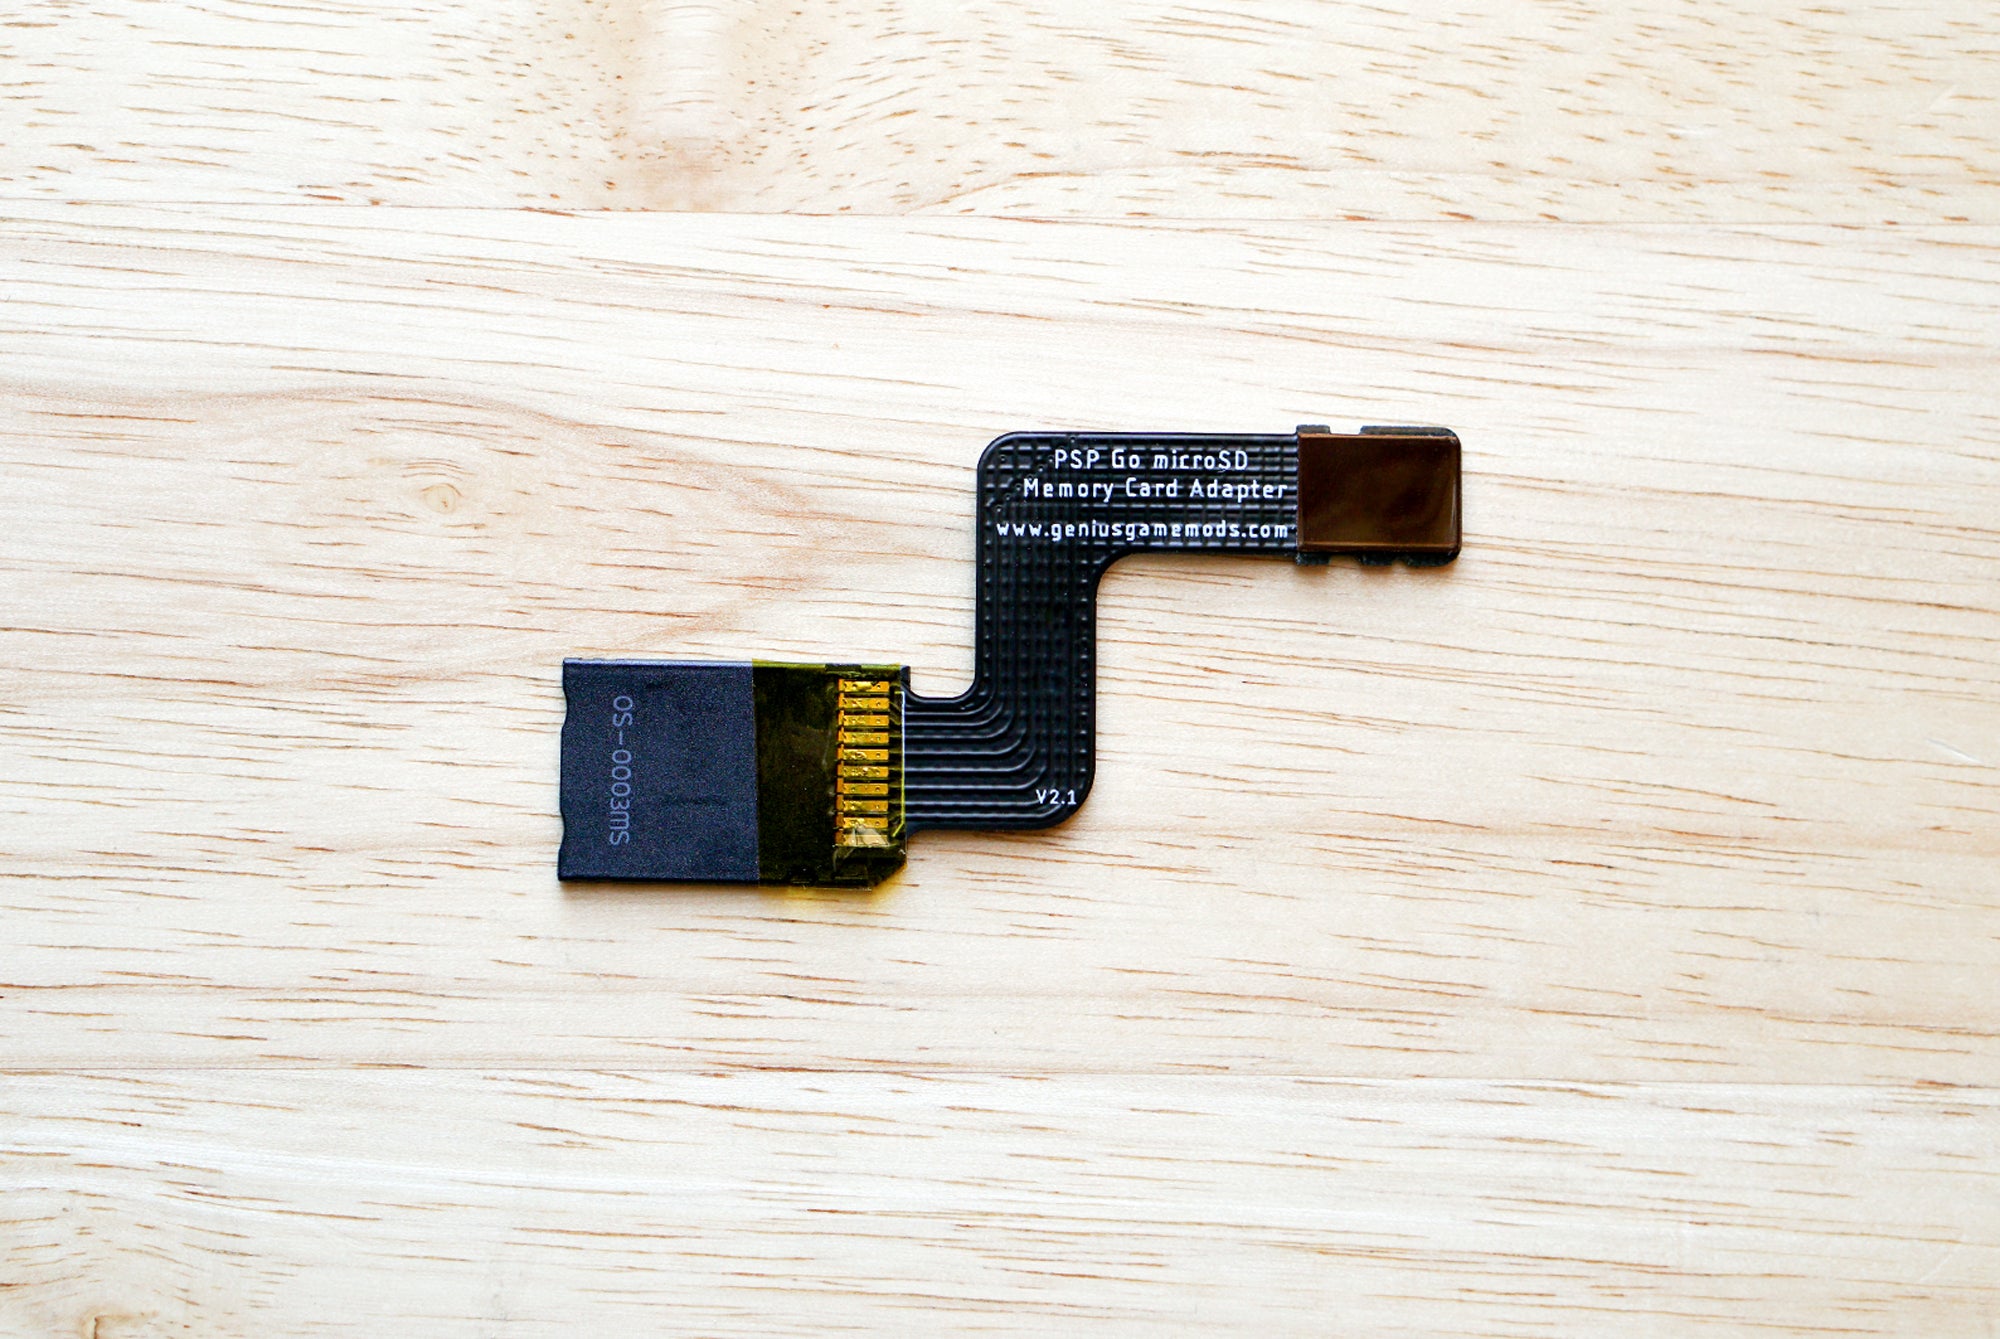 Micro SD Memory Card Adapter for the PSP Go – Genius Game Mods